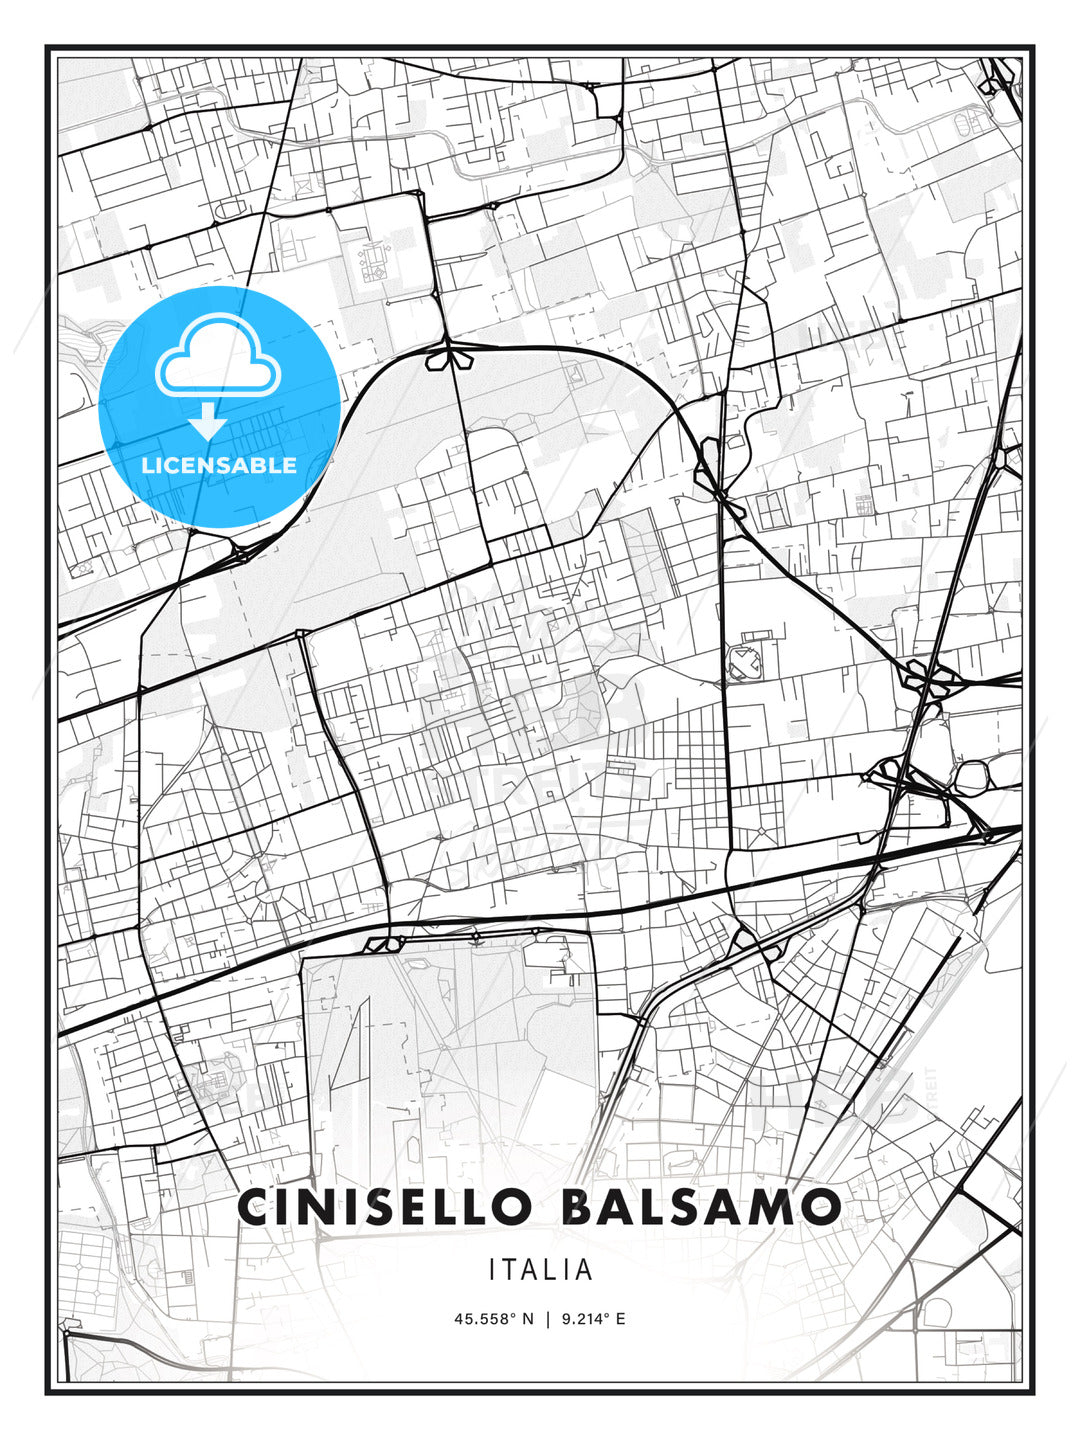 Cinisello Balsamo, Italy, Modern Print Template in Various Formats - HEBSTREITS Sketches